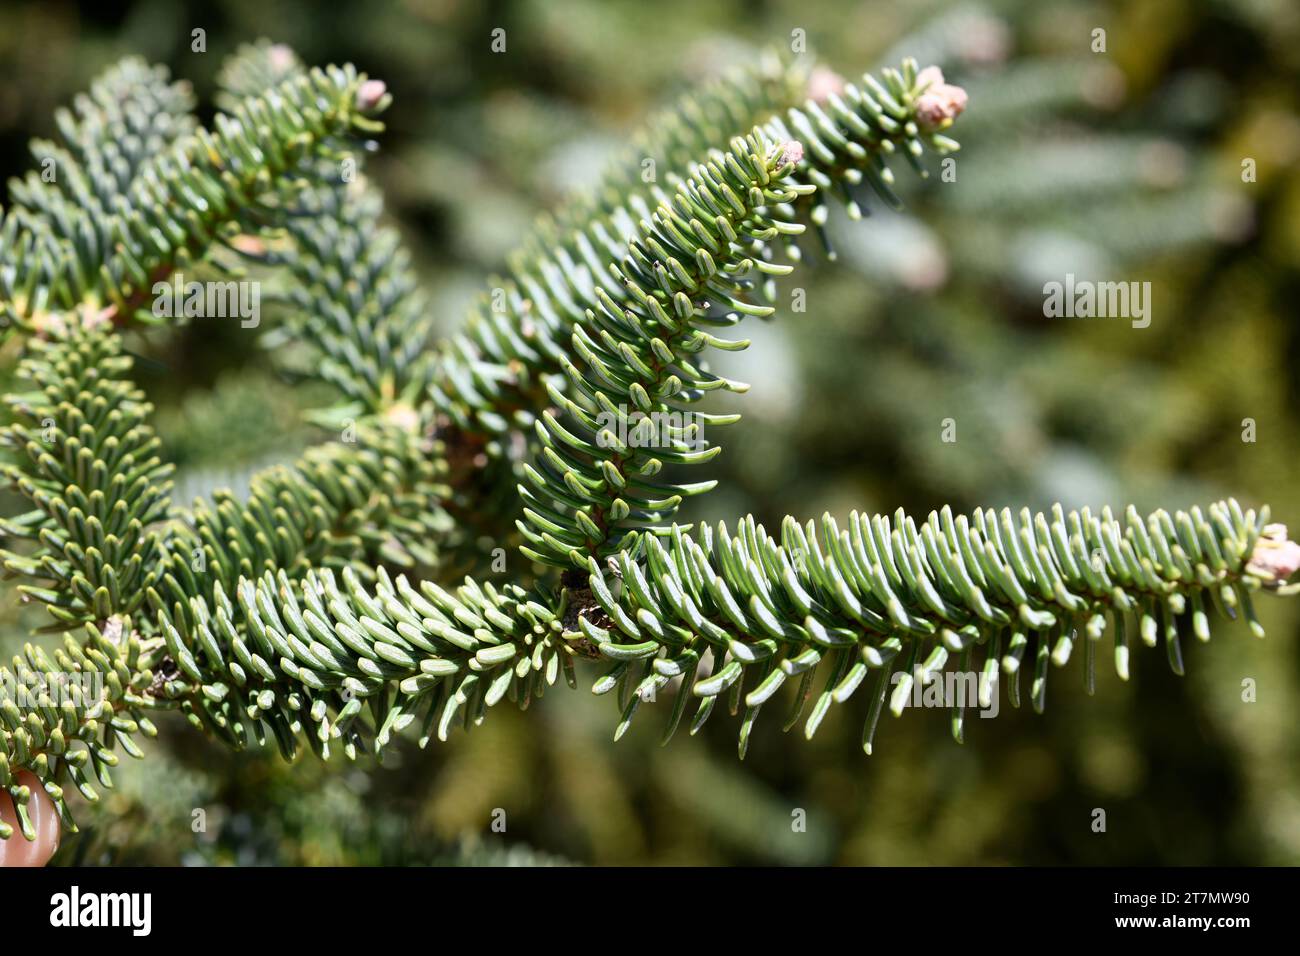 Spanish fir or pinsapo (Abies pinsapo) evergreen tree endemic to Mountains of Cadiz and Malaga. Leaves detail. This photo was taken in Los Lajares, Si Stock Photo